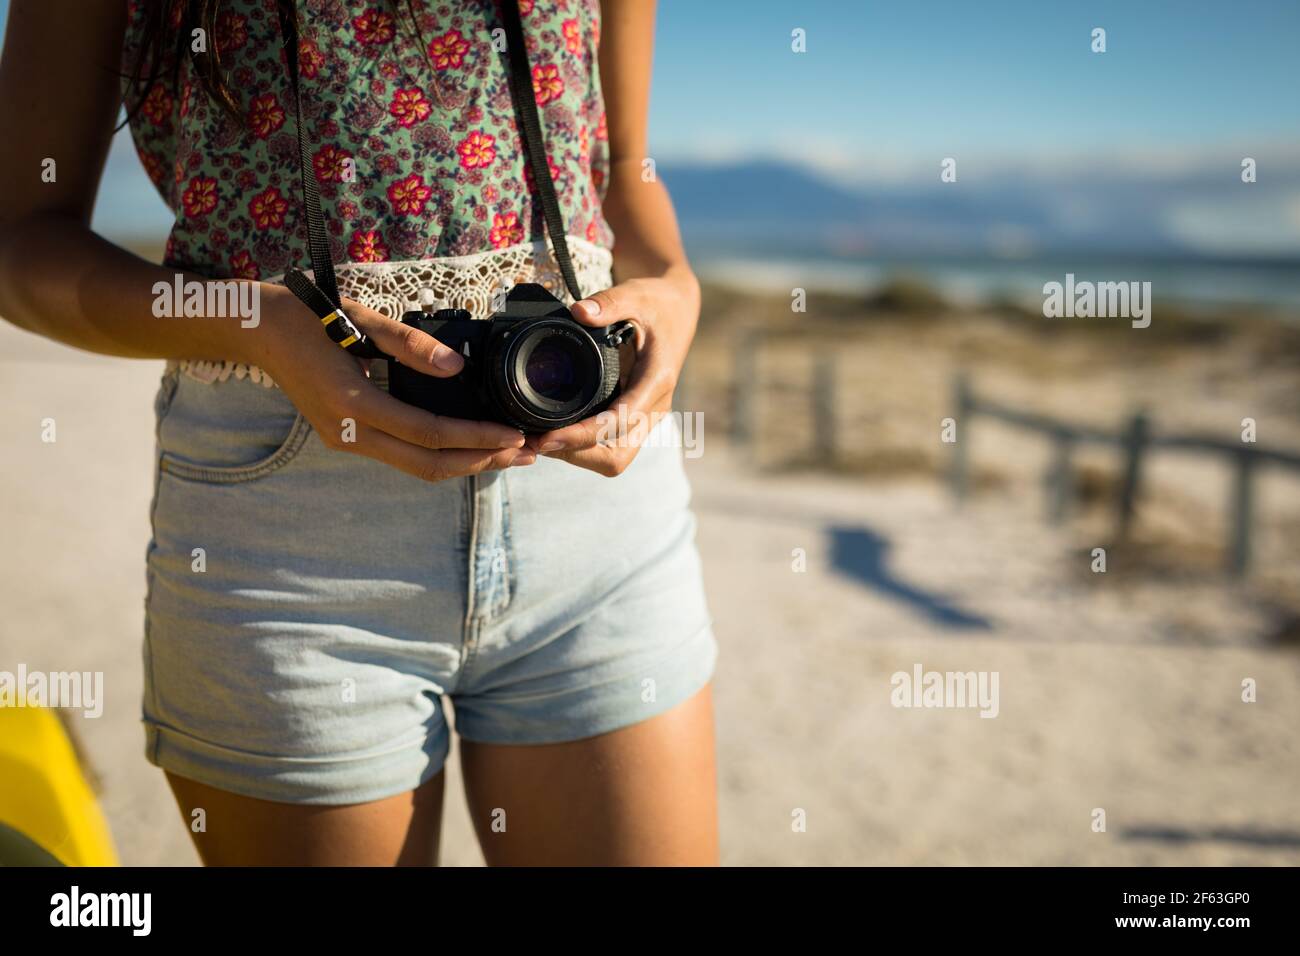 Midsection of caucasian woman on beach by the sea holding camera Stock Photo